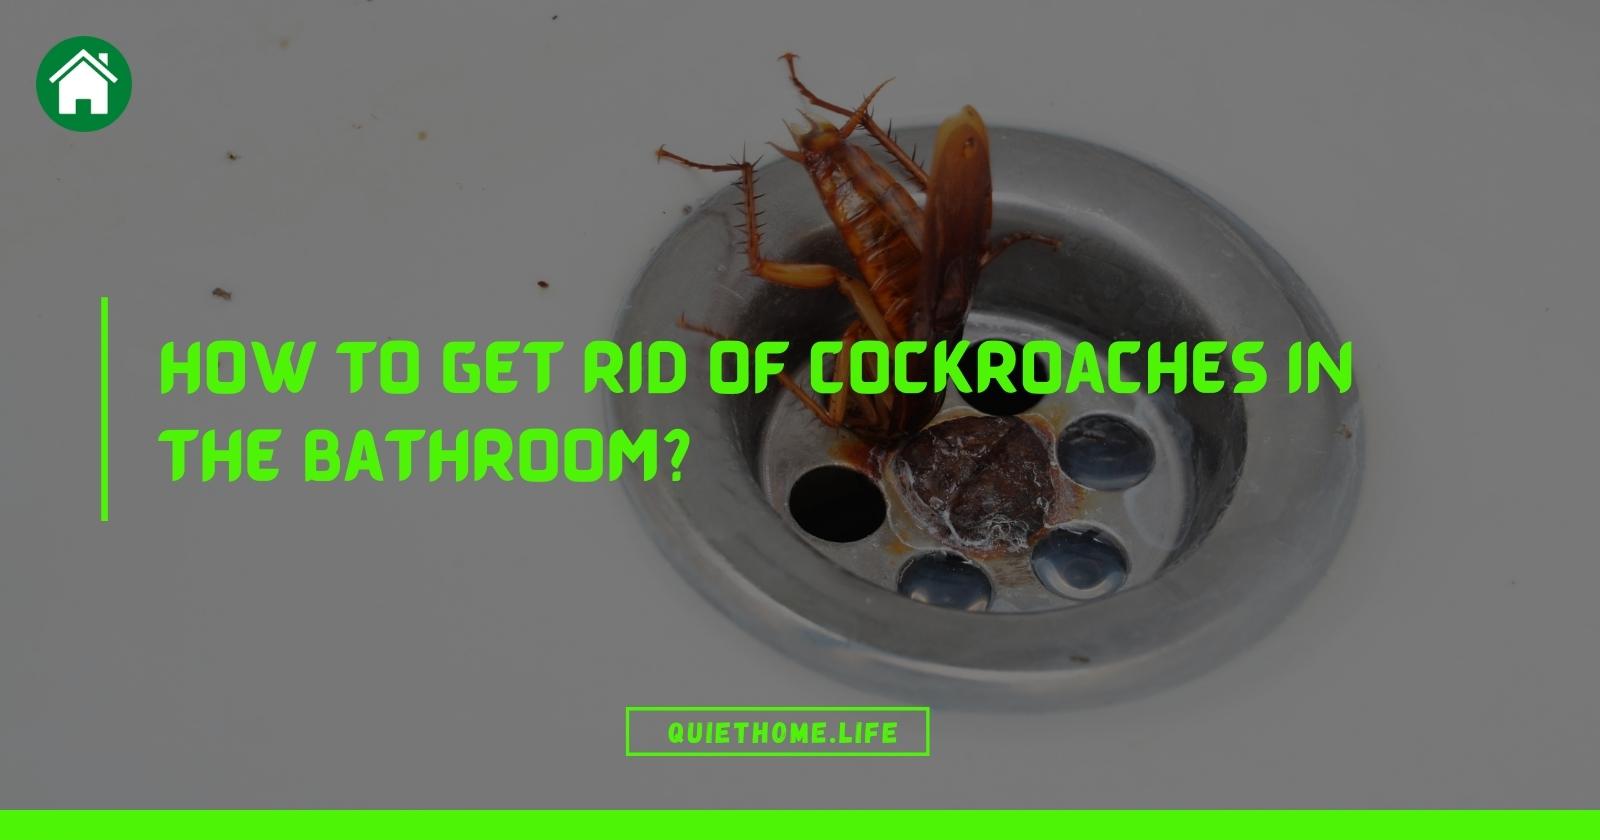 How To Get Rid Of Cockroaches In The Bathroom